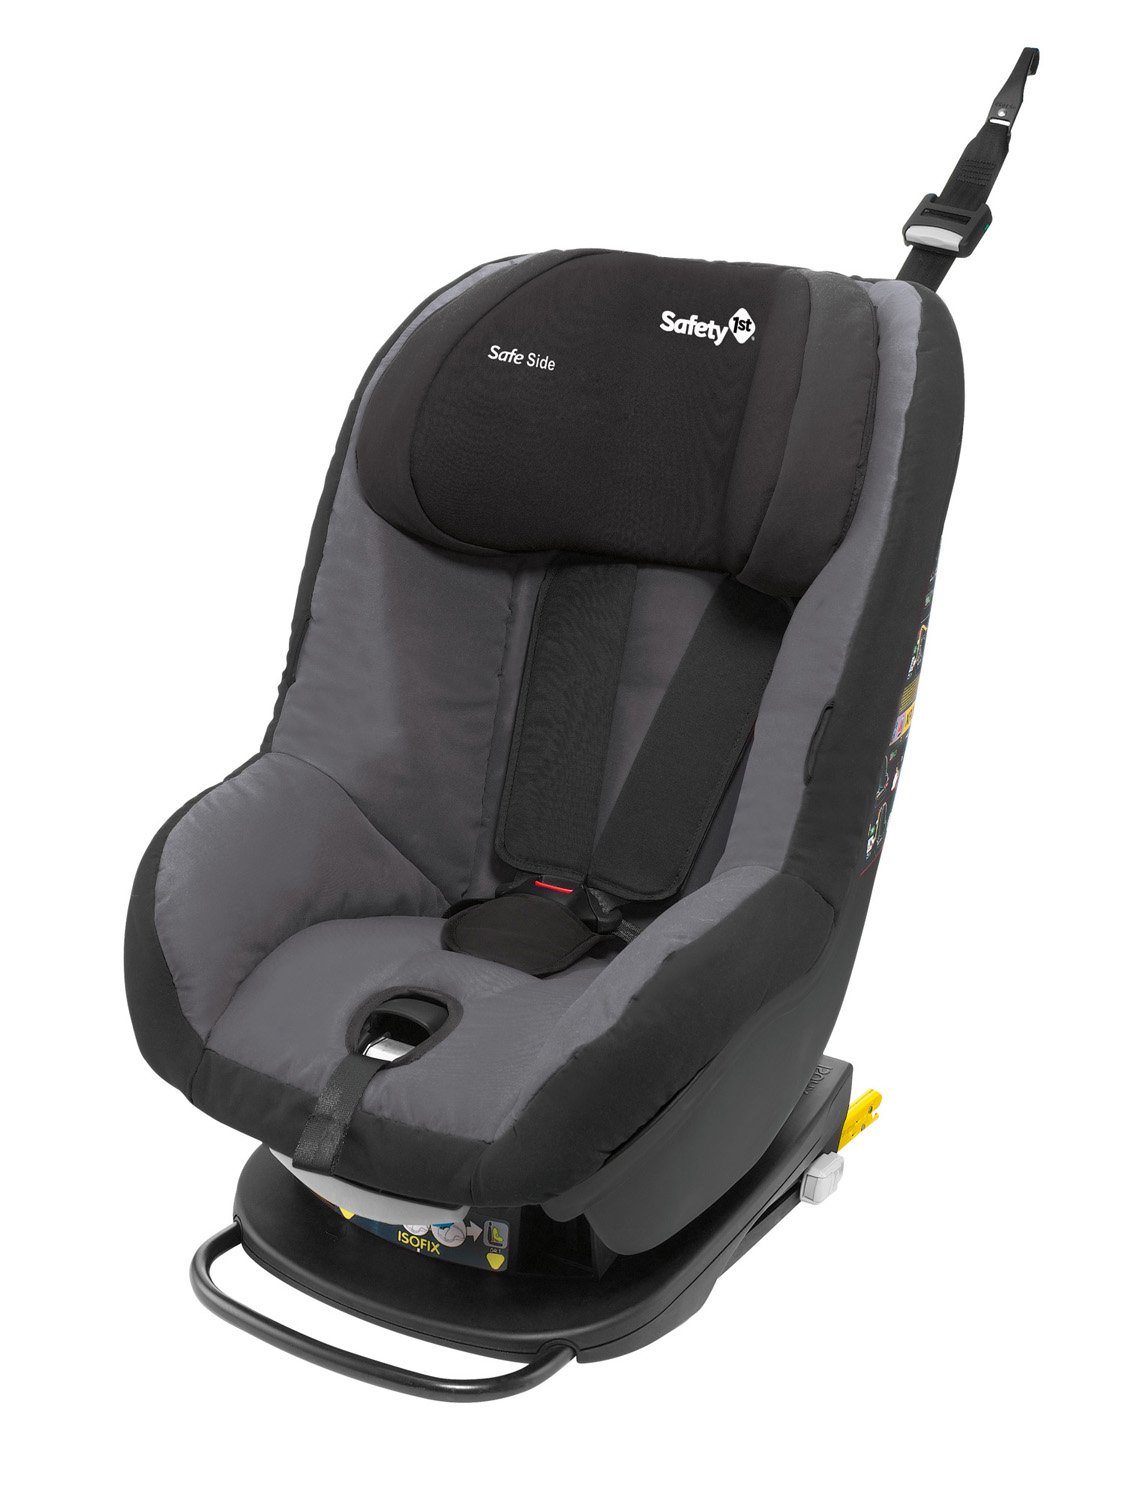 Safety 1st PrimeoFix Child Car Seat Group 0 +/1 for Backward-Facing Journeys from Birth to 18 Kg) Black Sky